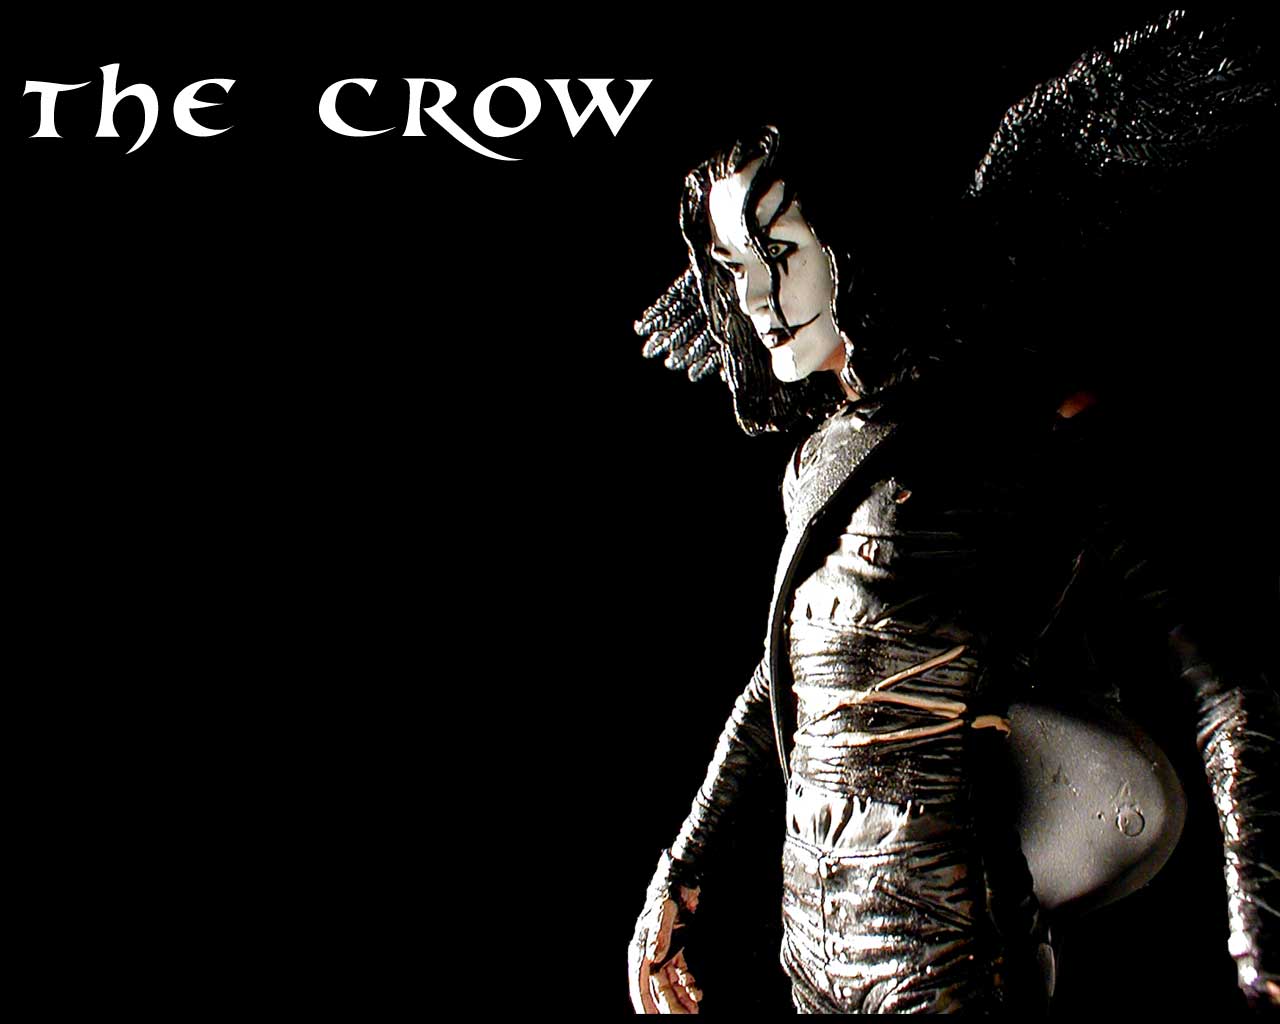 Free download HD Wallpaper The Crow Eric Draven Quotes 1024 X 768 82 Kb Jpeg HD [1280x1024] for your Desktop, Mobile & Tablet. Explore The Crow HD Wallpaper